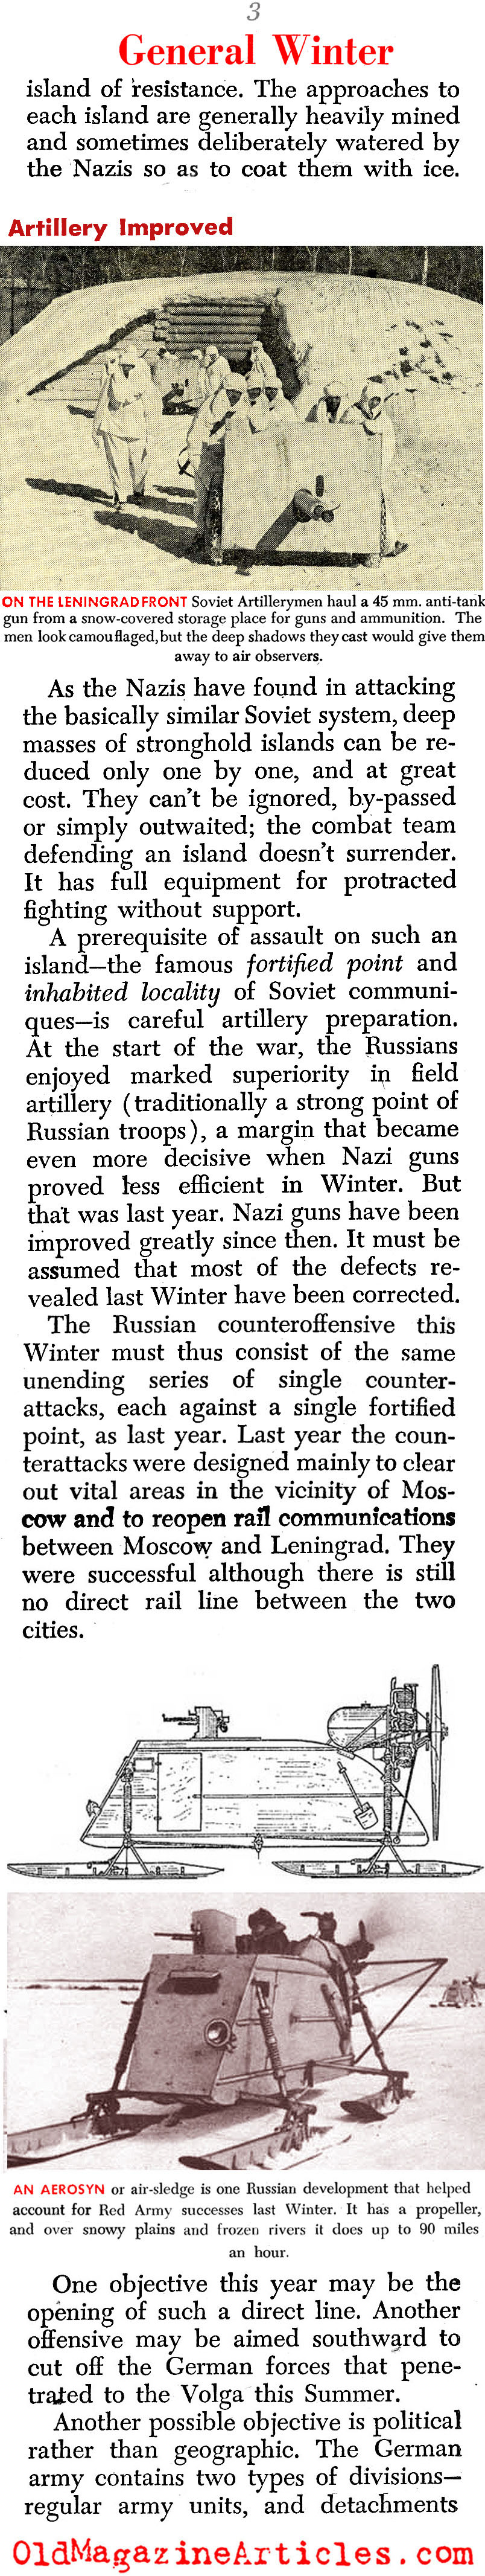 Fighting in Winter (PM Tabloid, 1942)